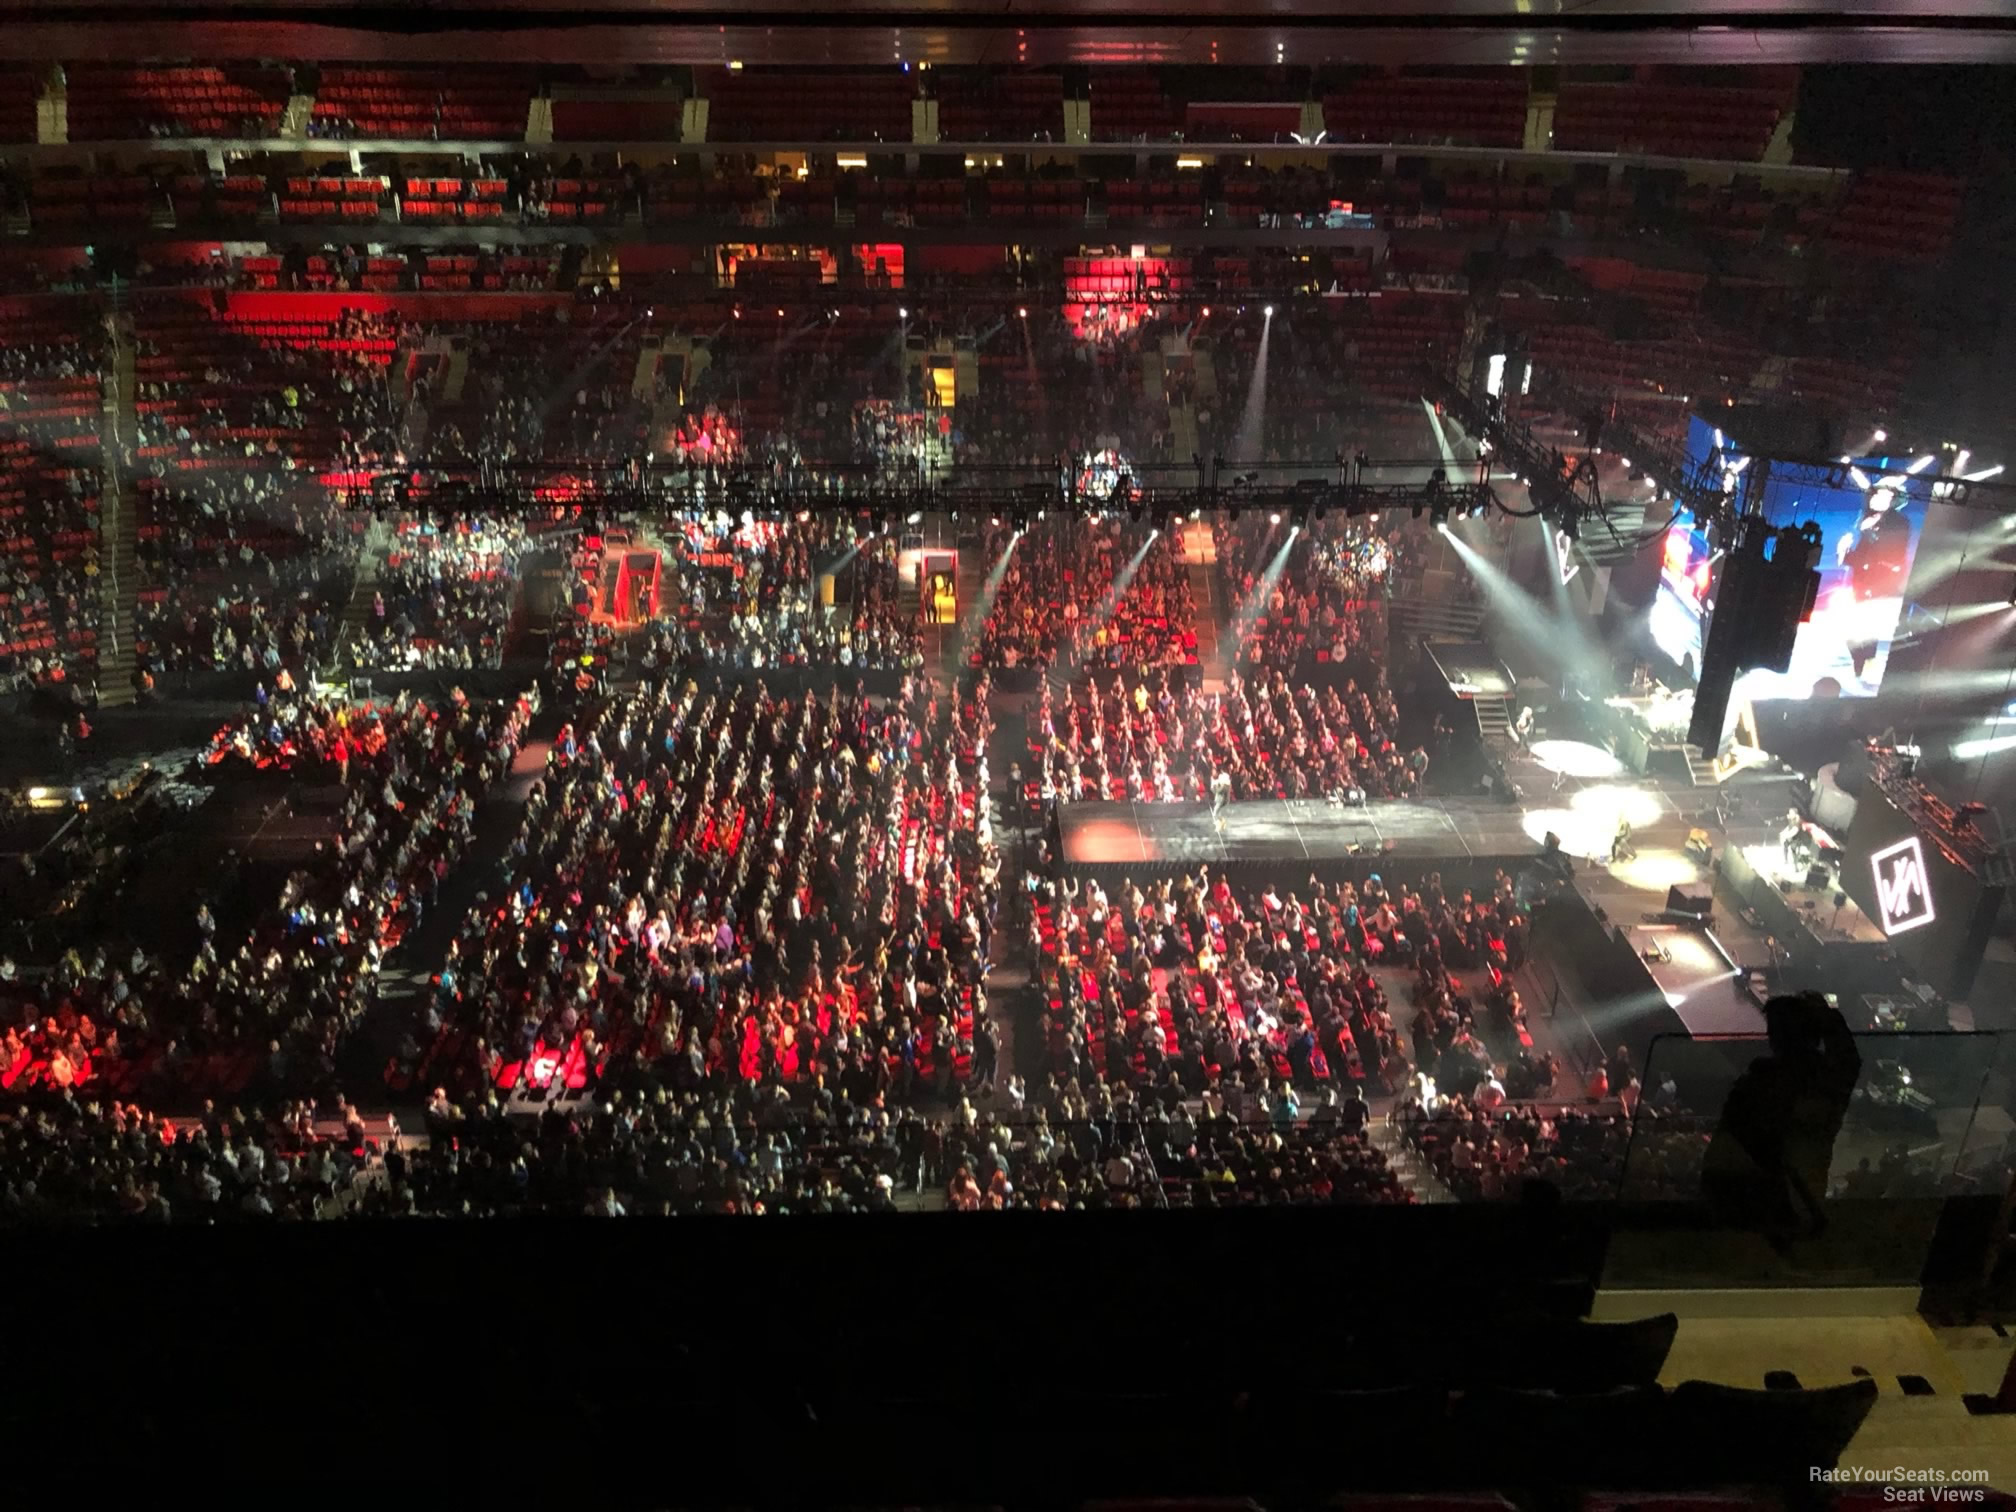 section 211, row 7 seat view  for concert - little caesars arena